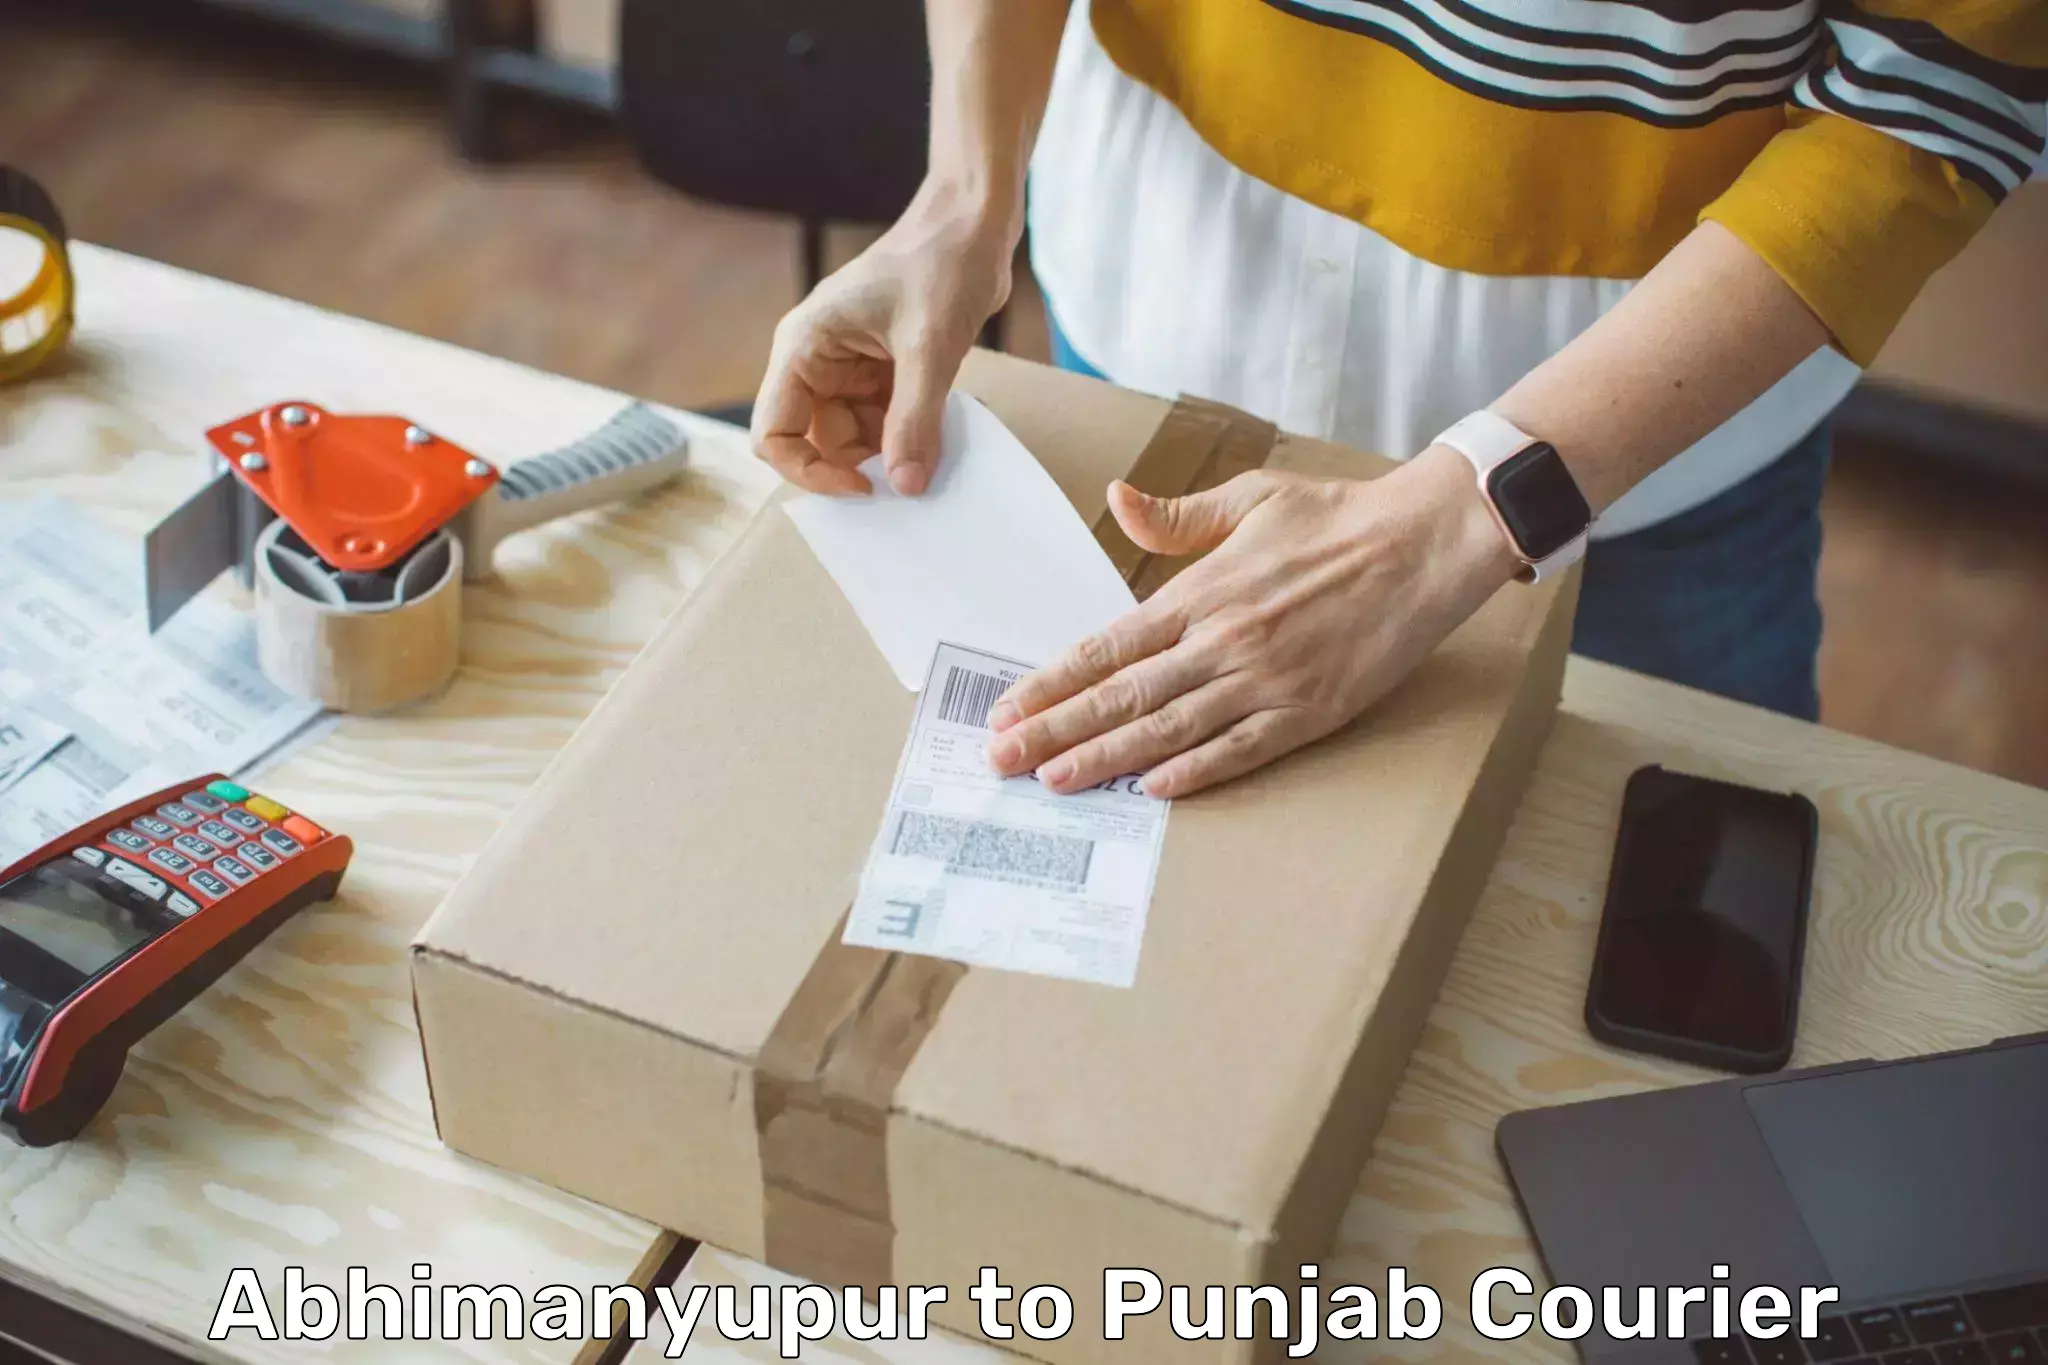 Reliable shipping partners Abhimanyupur to Zirakpur